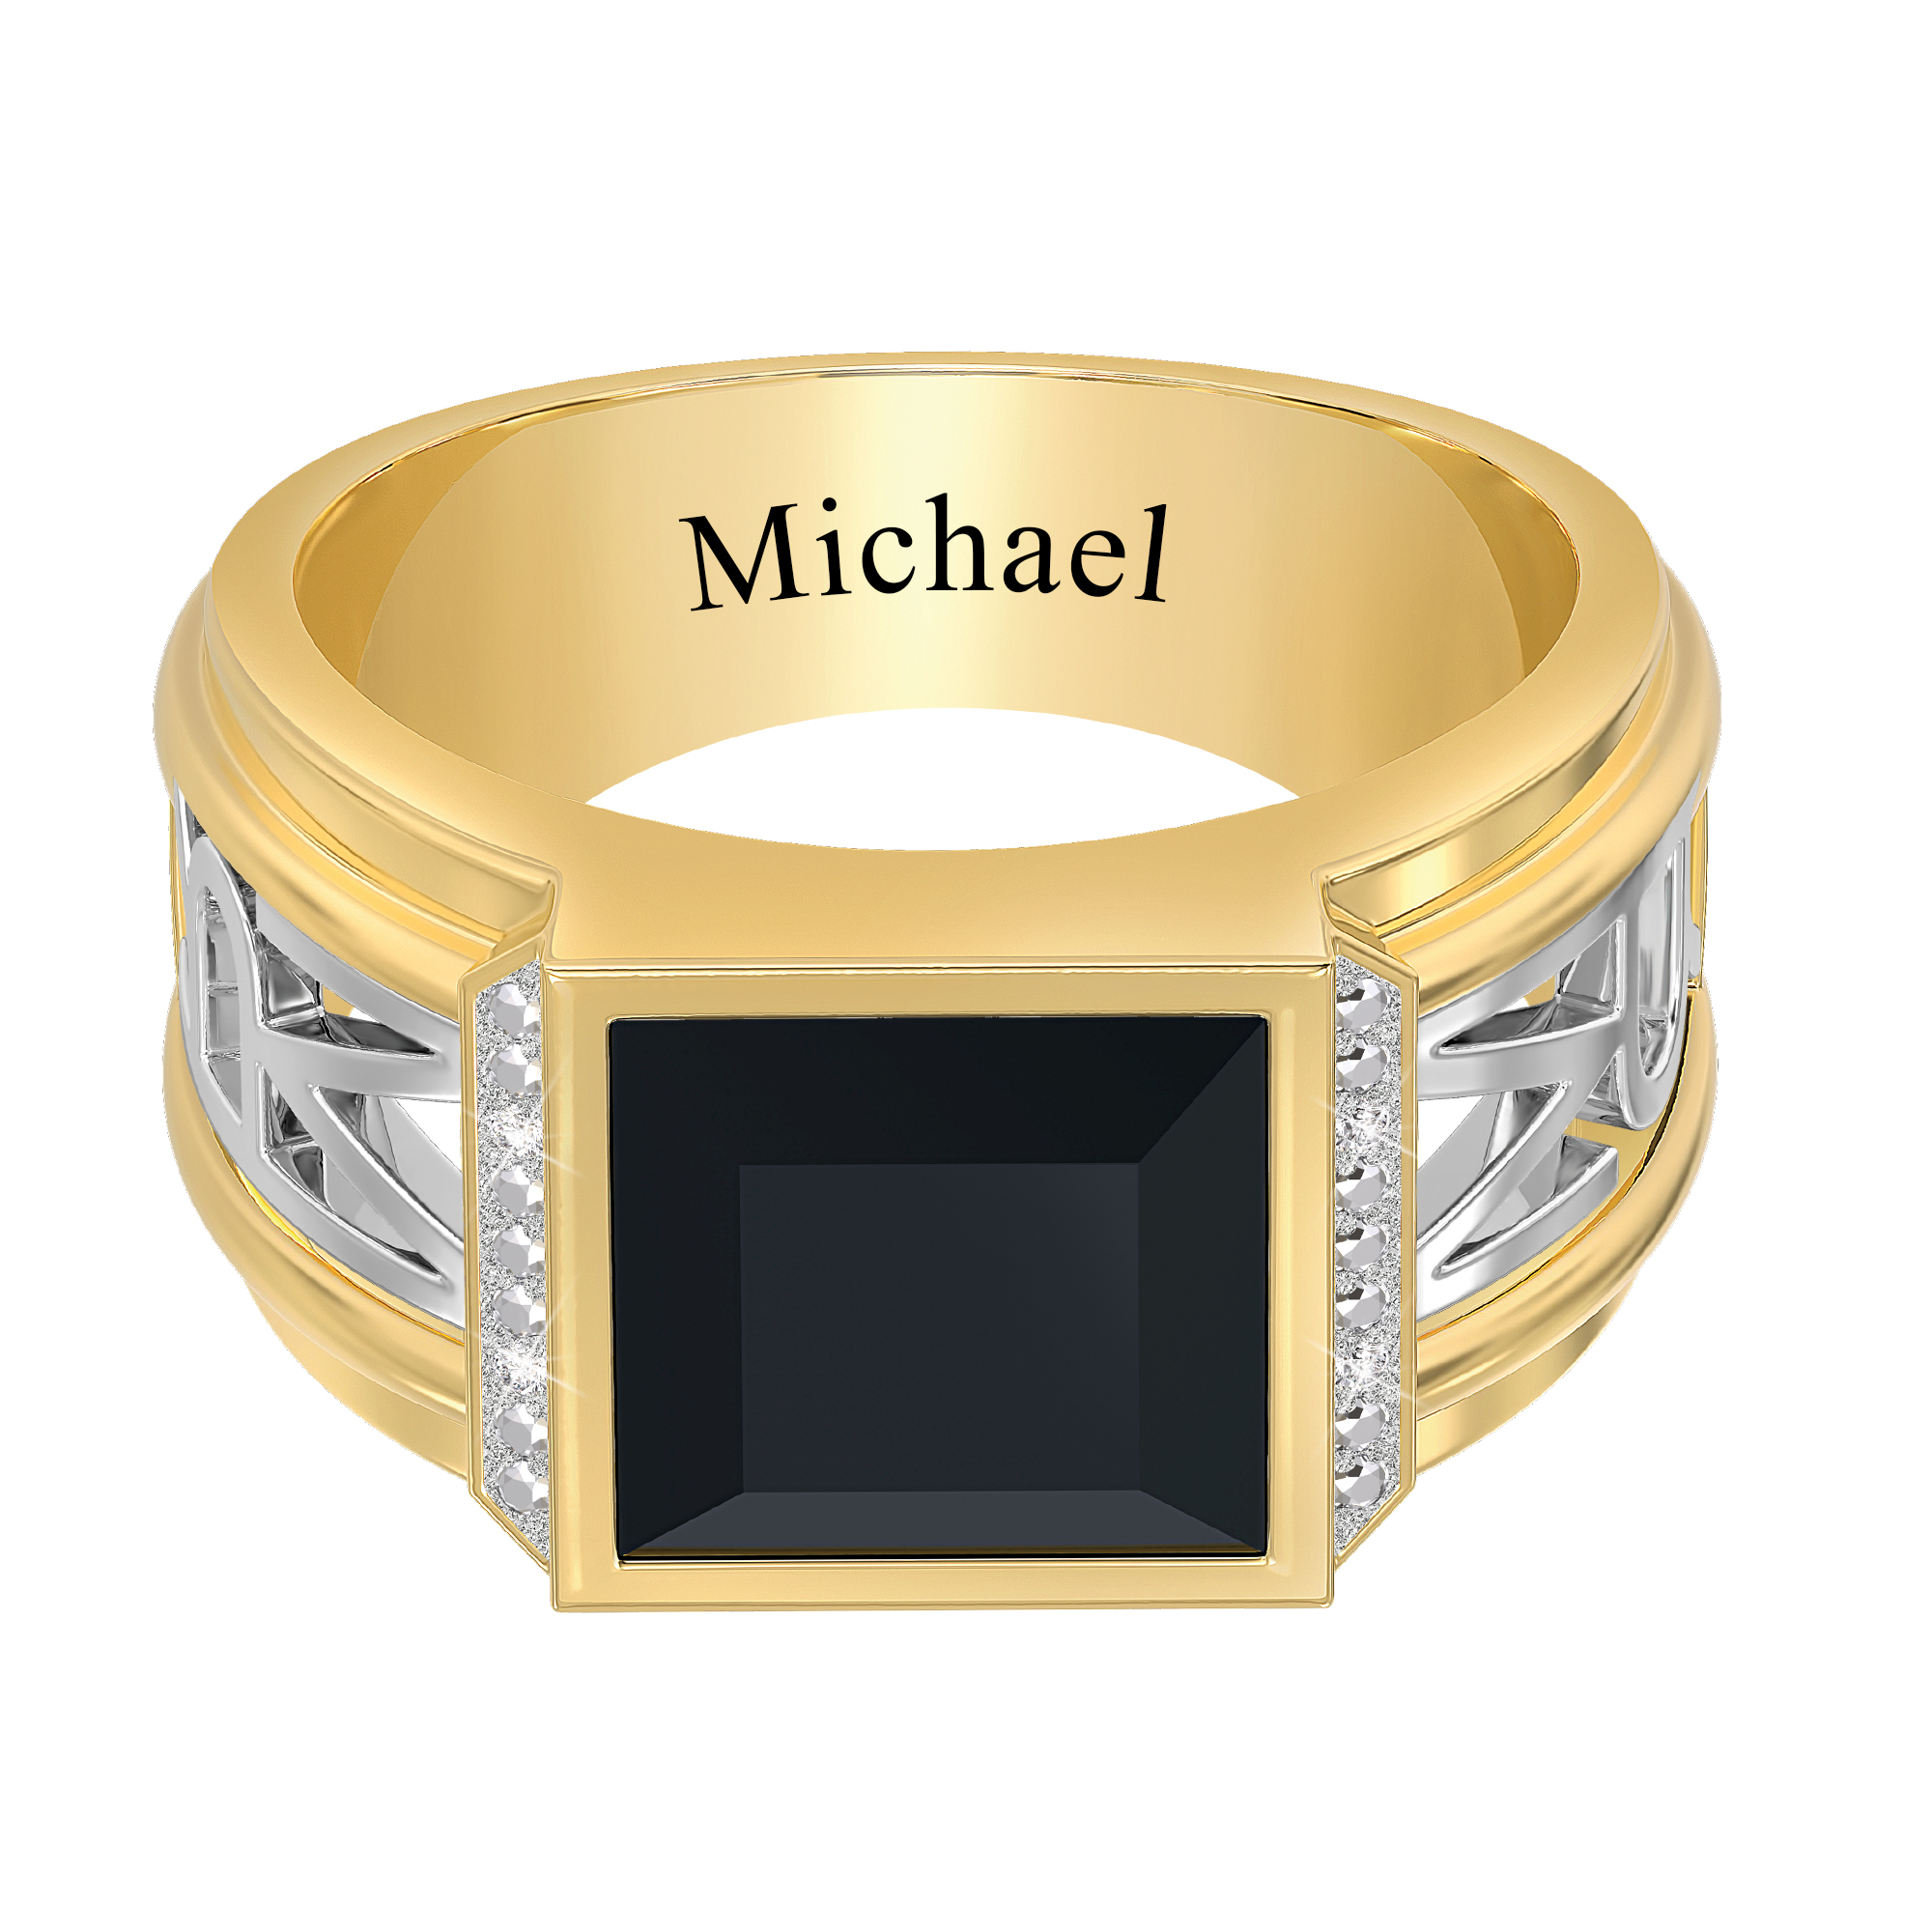 The Personalized Diamond Onyx Ring 10412 0019 a main